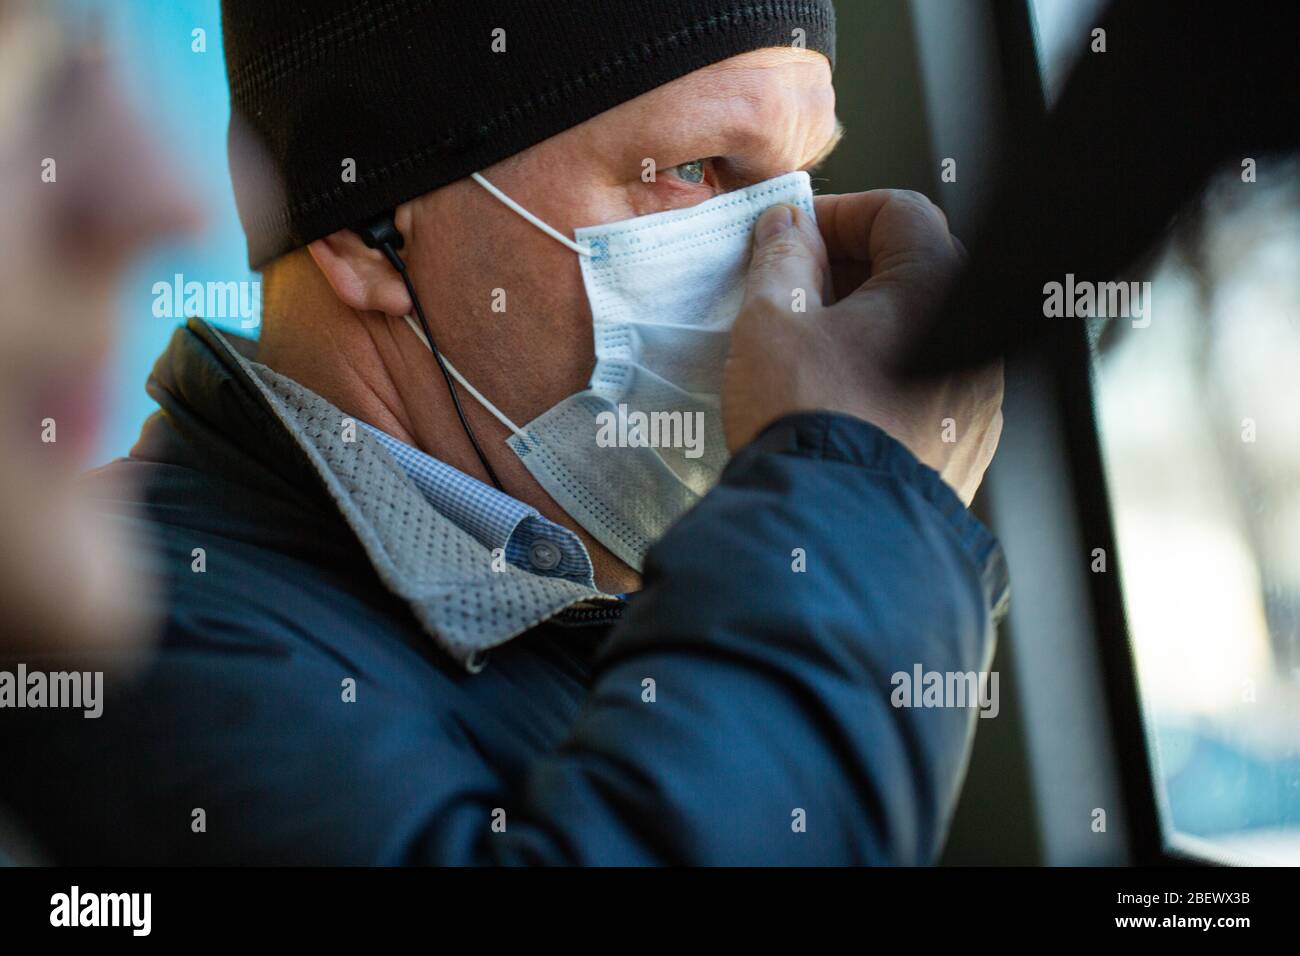 Vladivostok, Russia, March 24, 2020: a white man corrects his mask, stands on the bus during a pandemic outbreak of coronavirus. Stock Photo